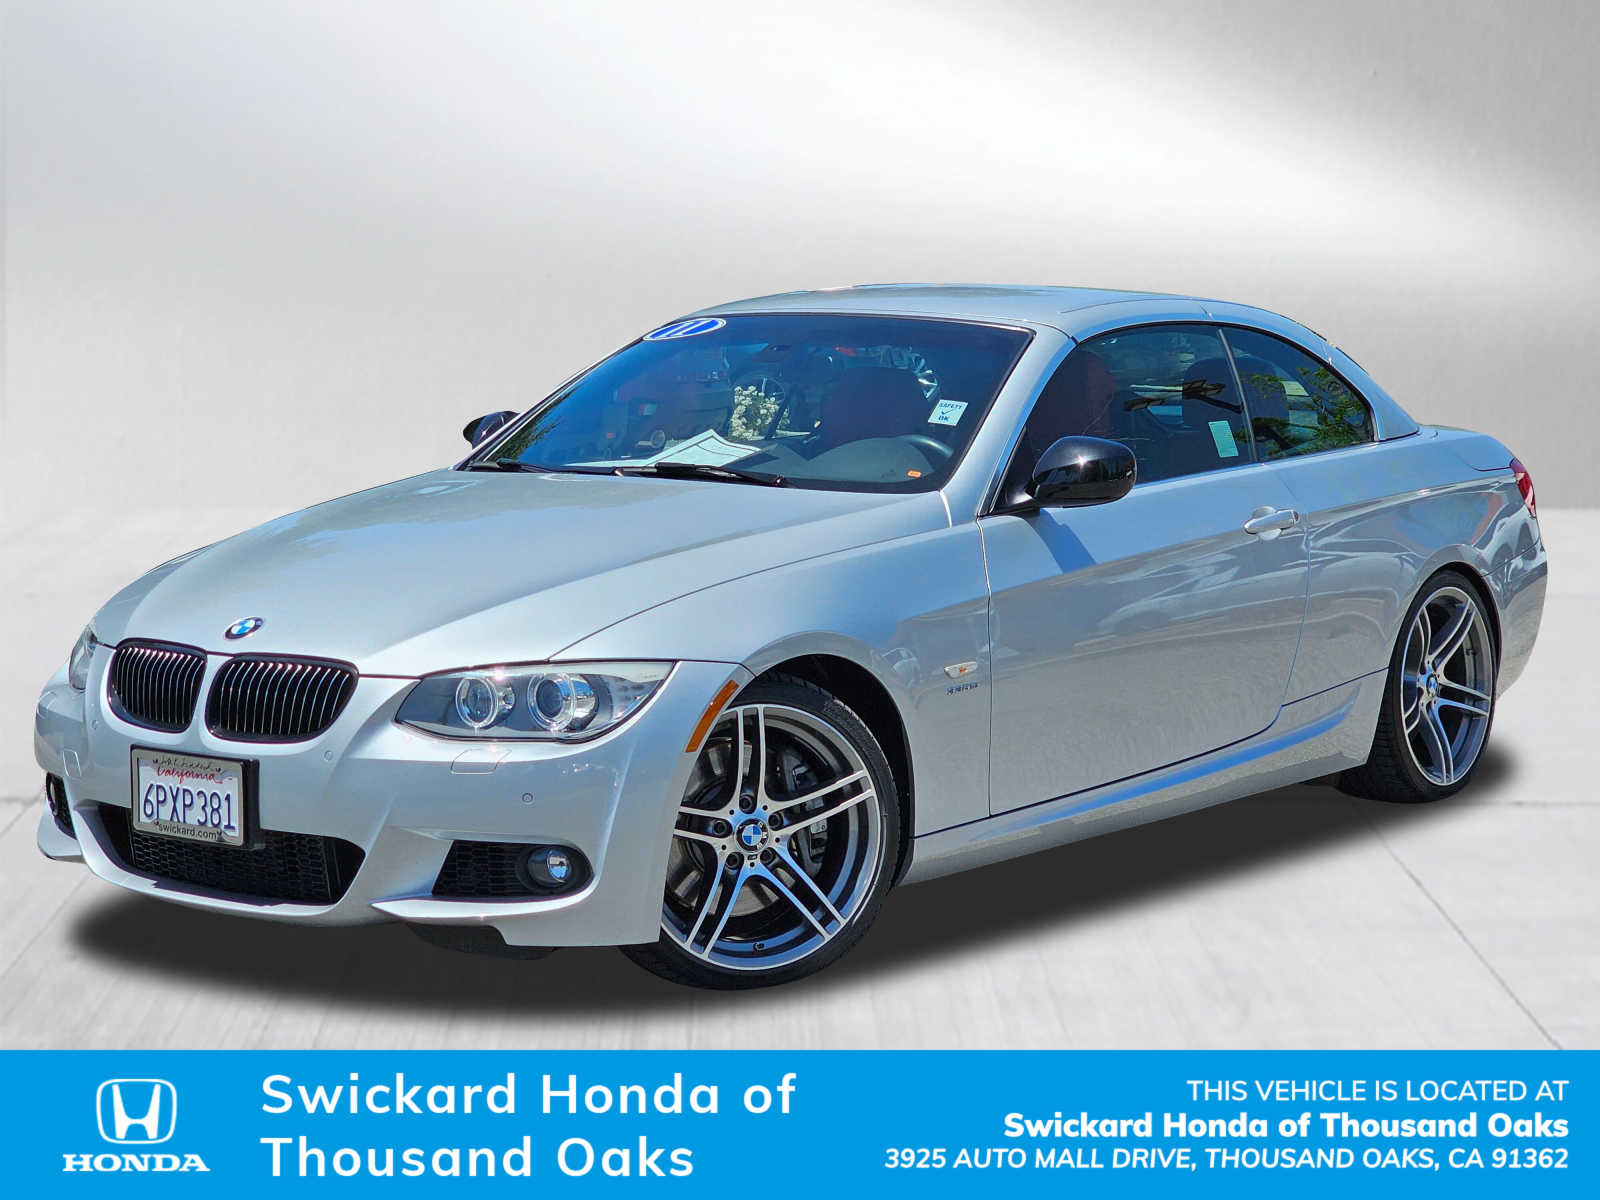 2011 BMW 3 Series 335is Convertible RWD